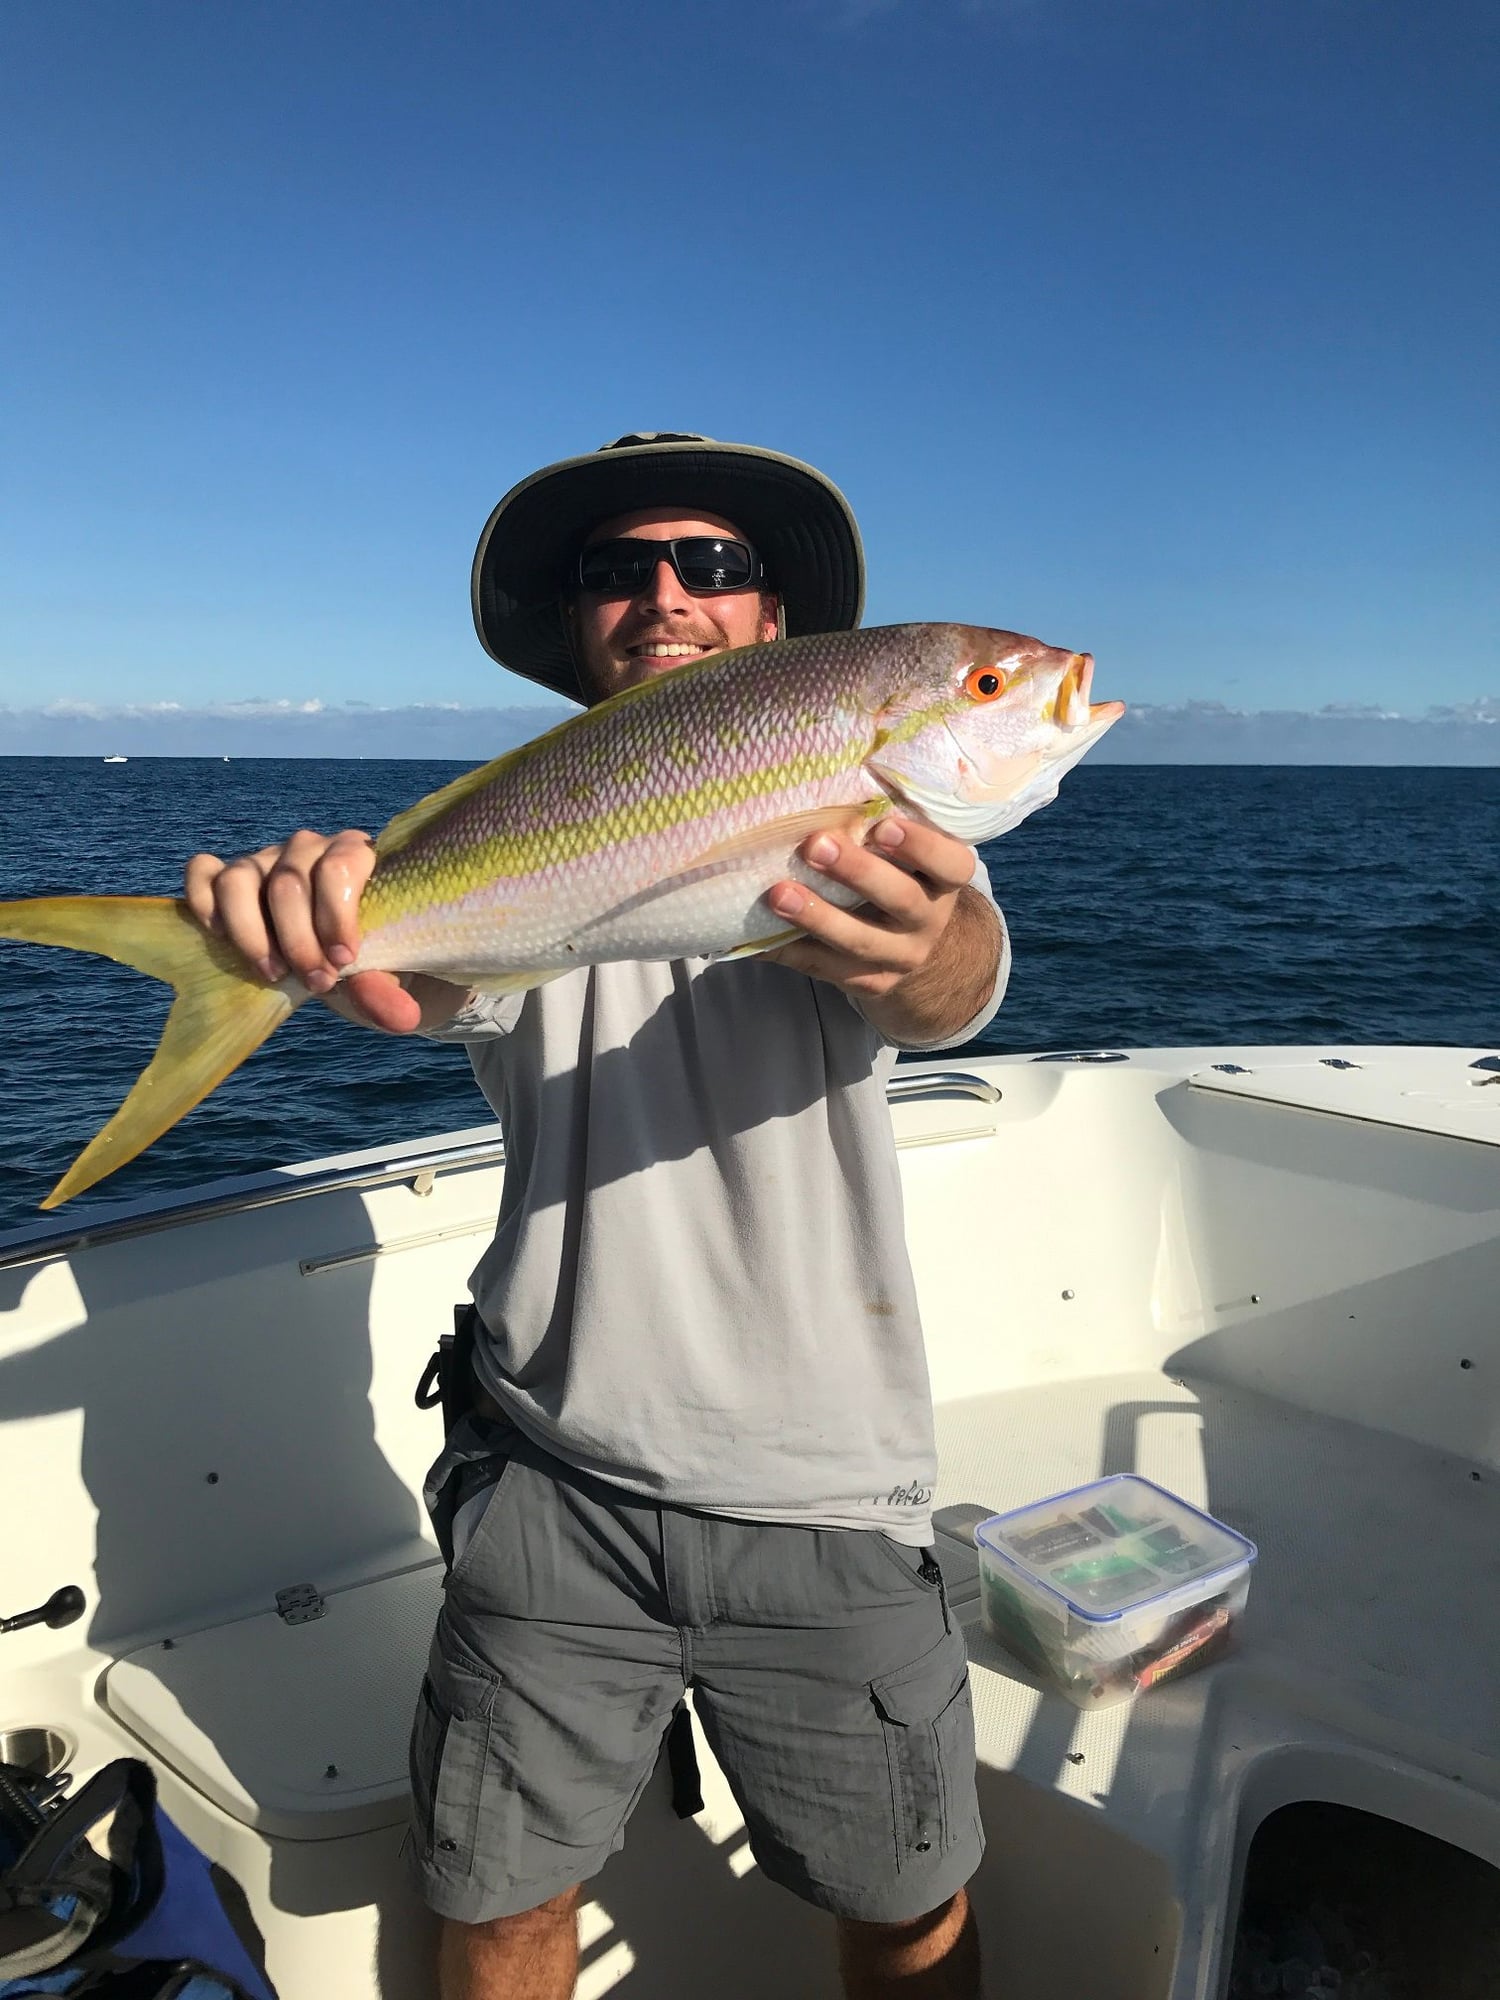 6 Yellowtail Snapper Fishing Tips to Help You Catch More Fish